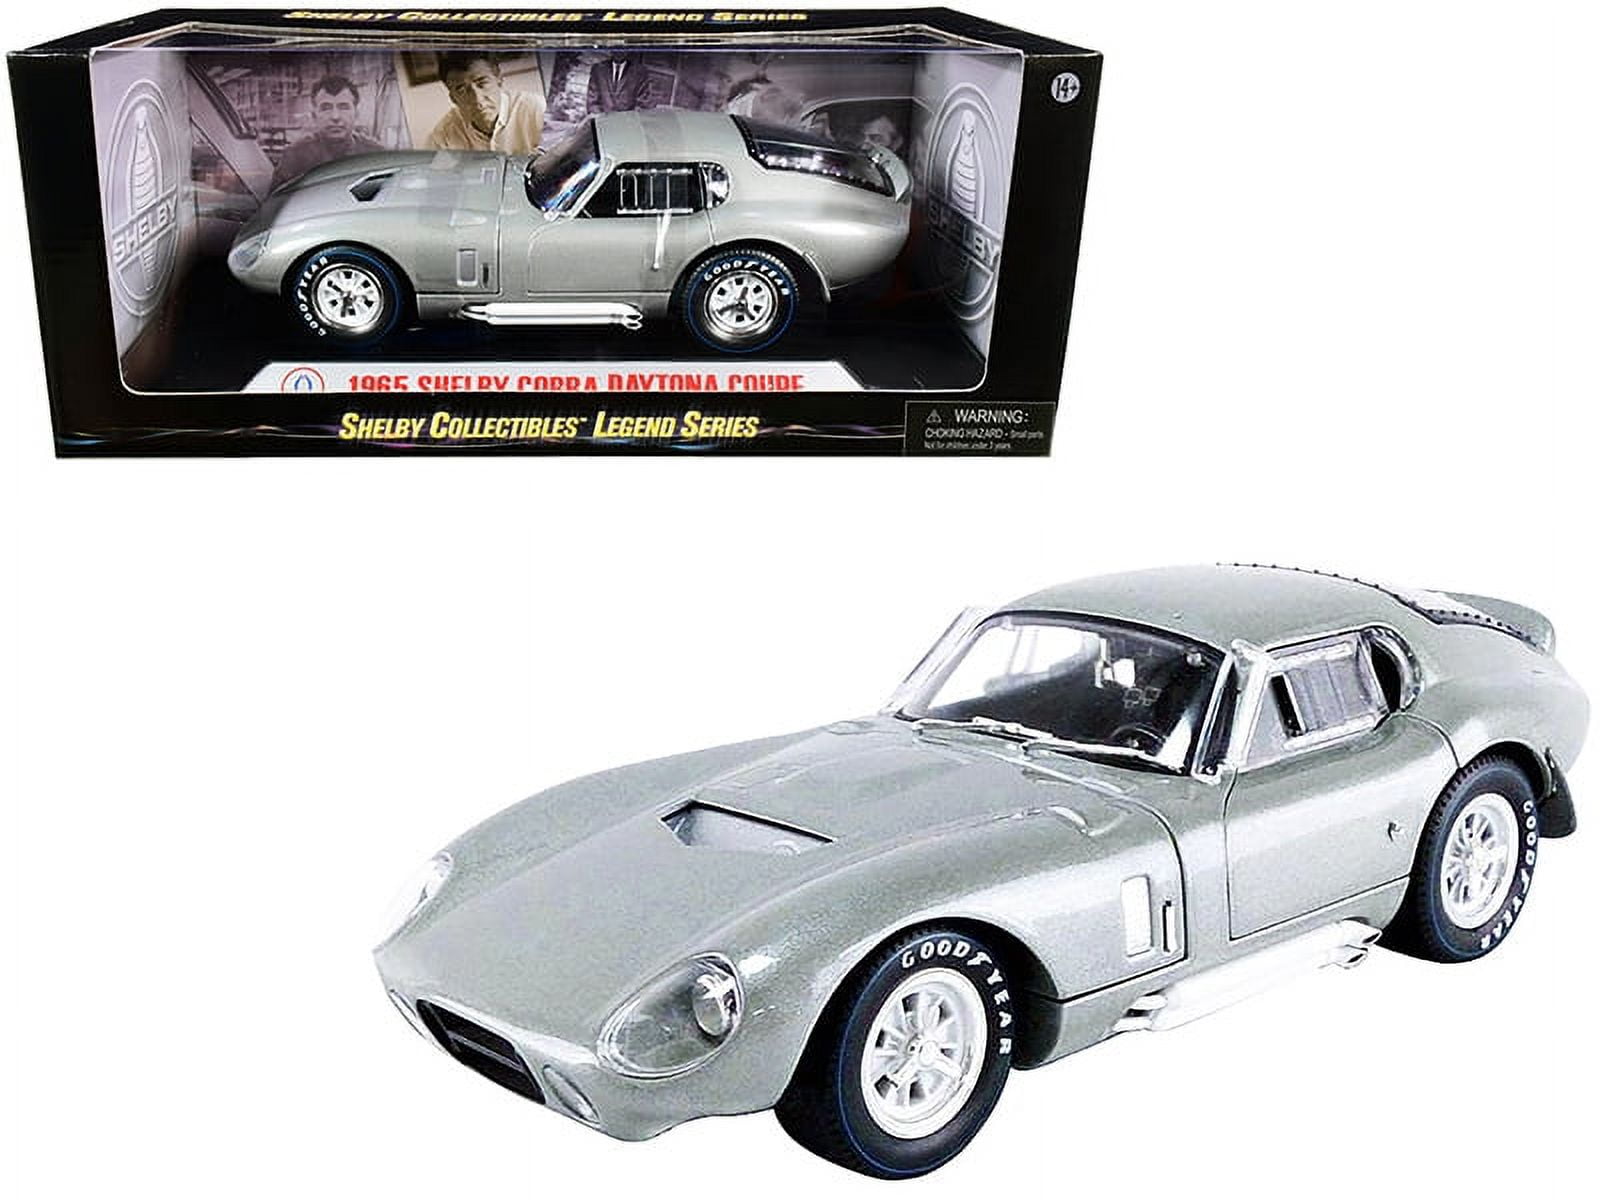 SHELBY COLLECTIBLES SC132